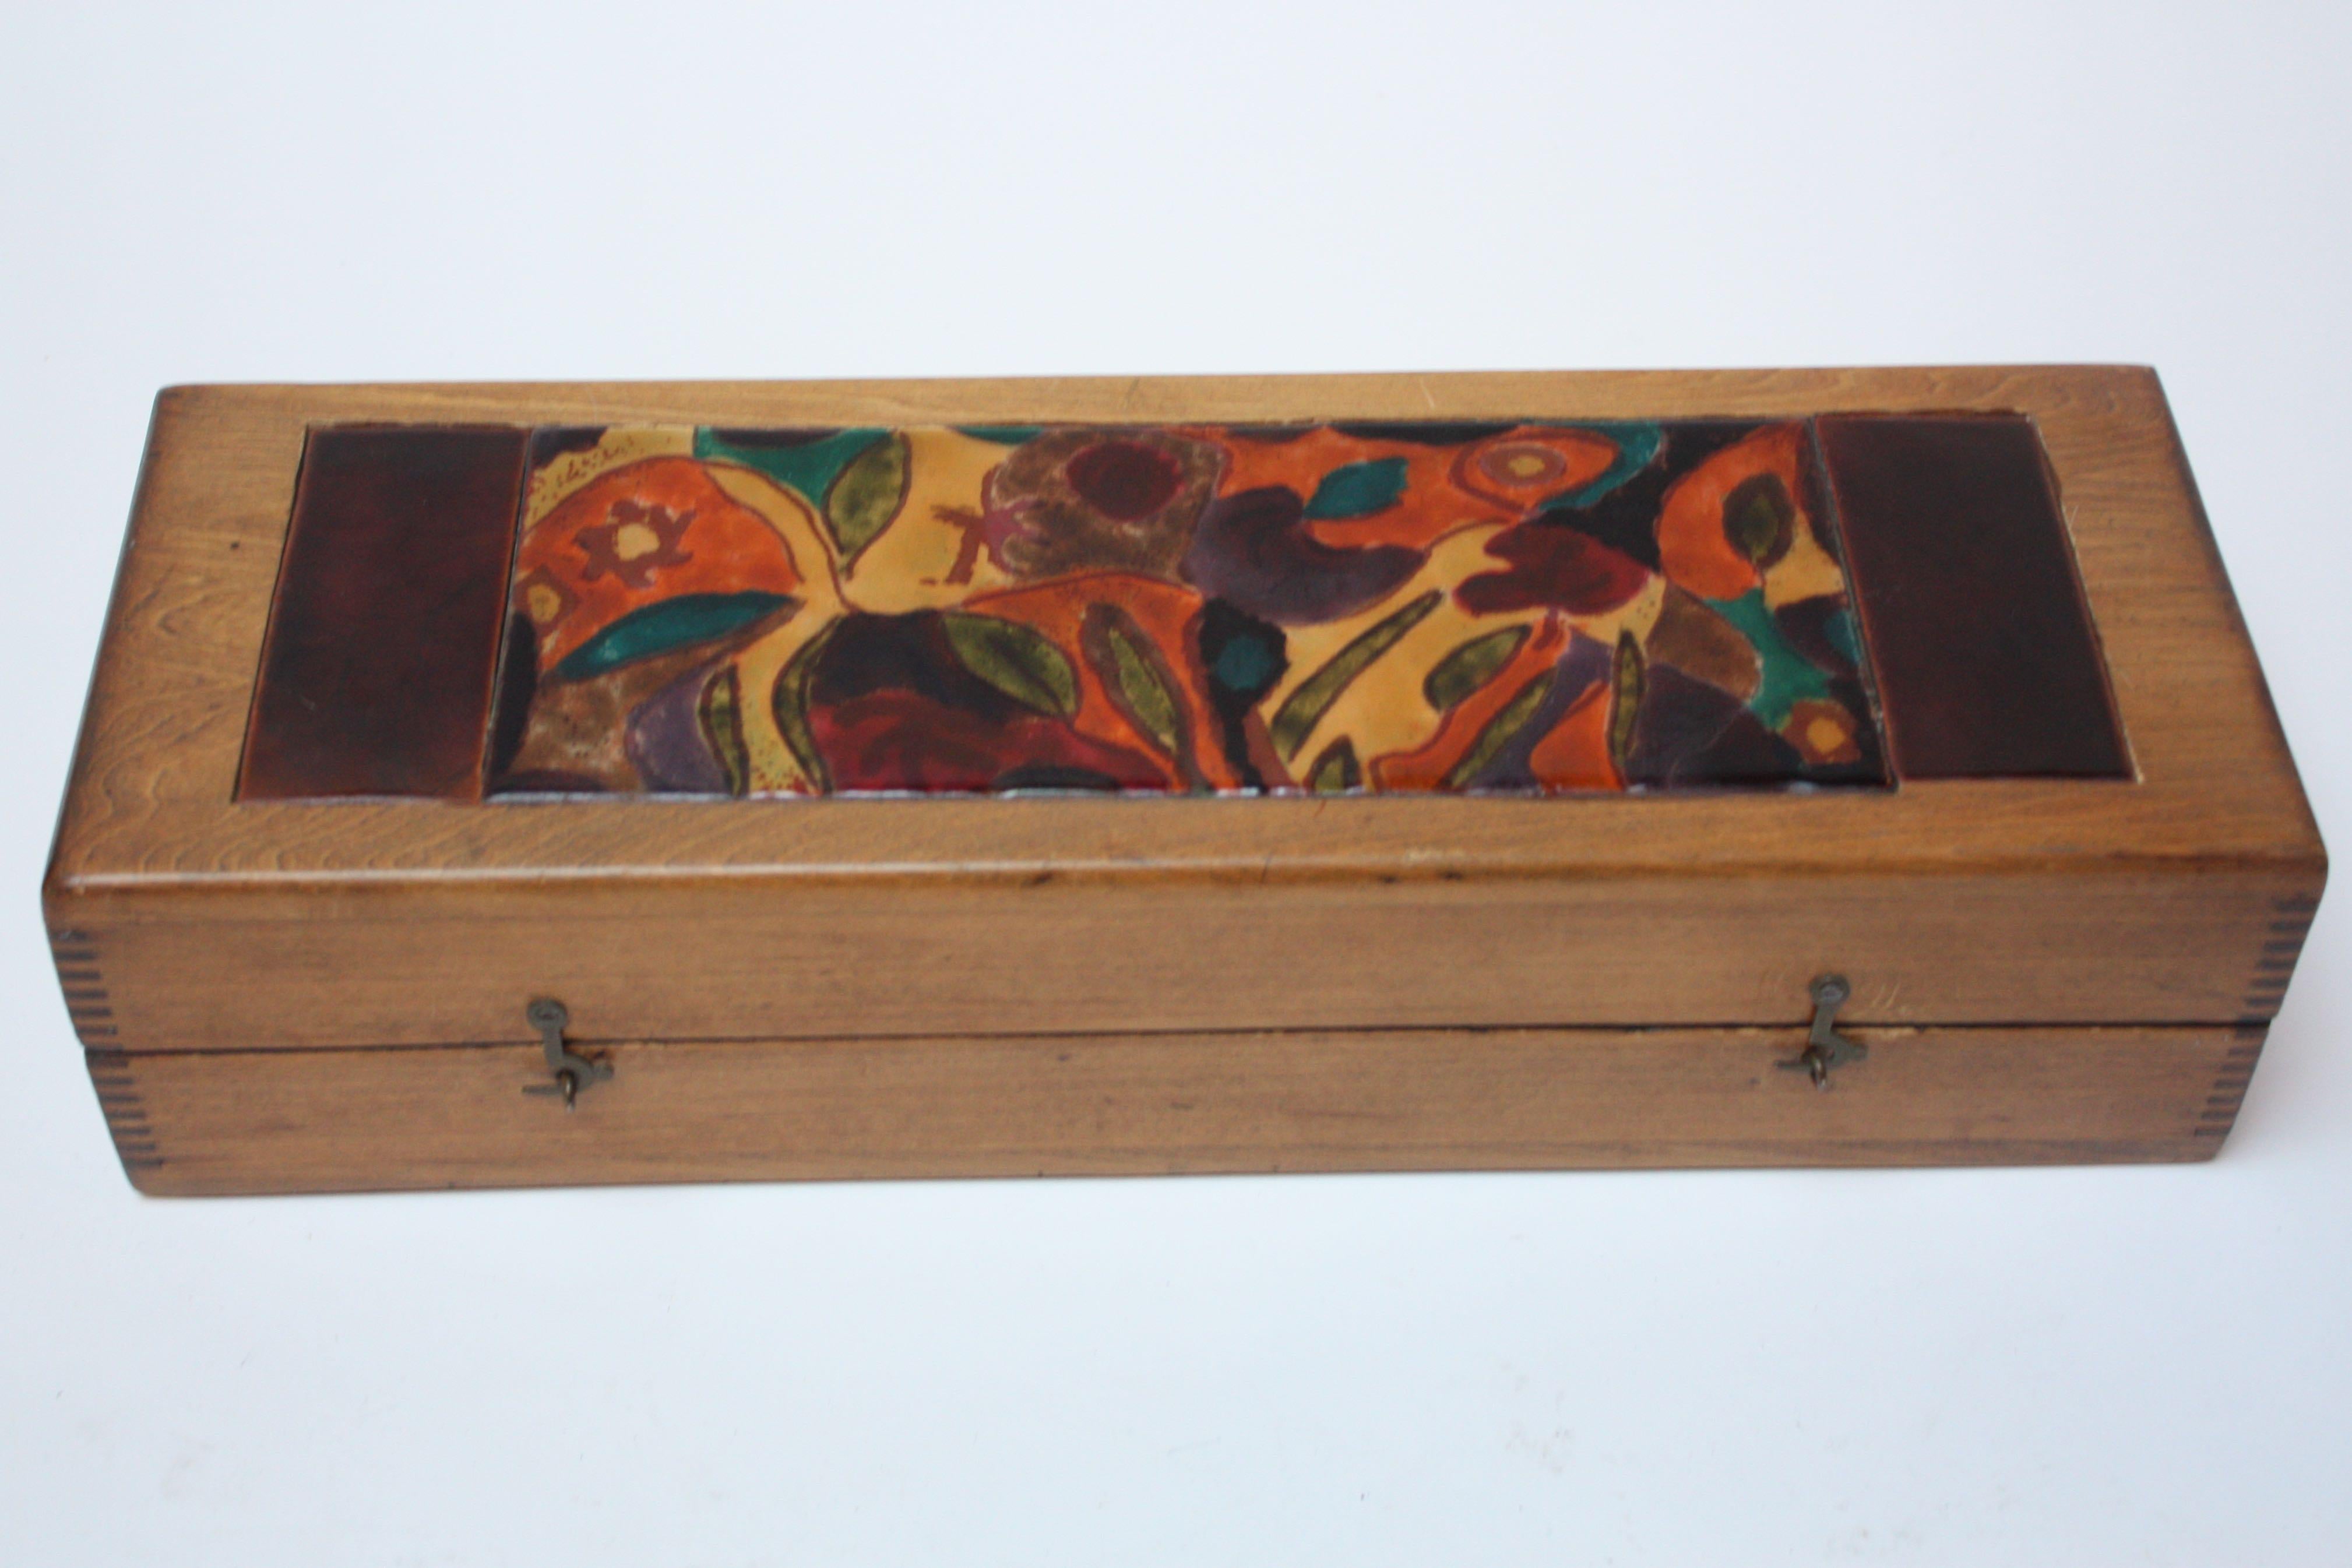 This is a nice example of artist, Elizabeth Bensley's enamel work from the late 1940s displayed beautifully on a wooden box. Note that the box top does not stay open at an angle as the hinges may suggest; it folds over and lays flat on a surface, as